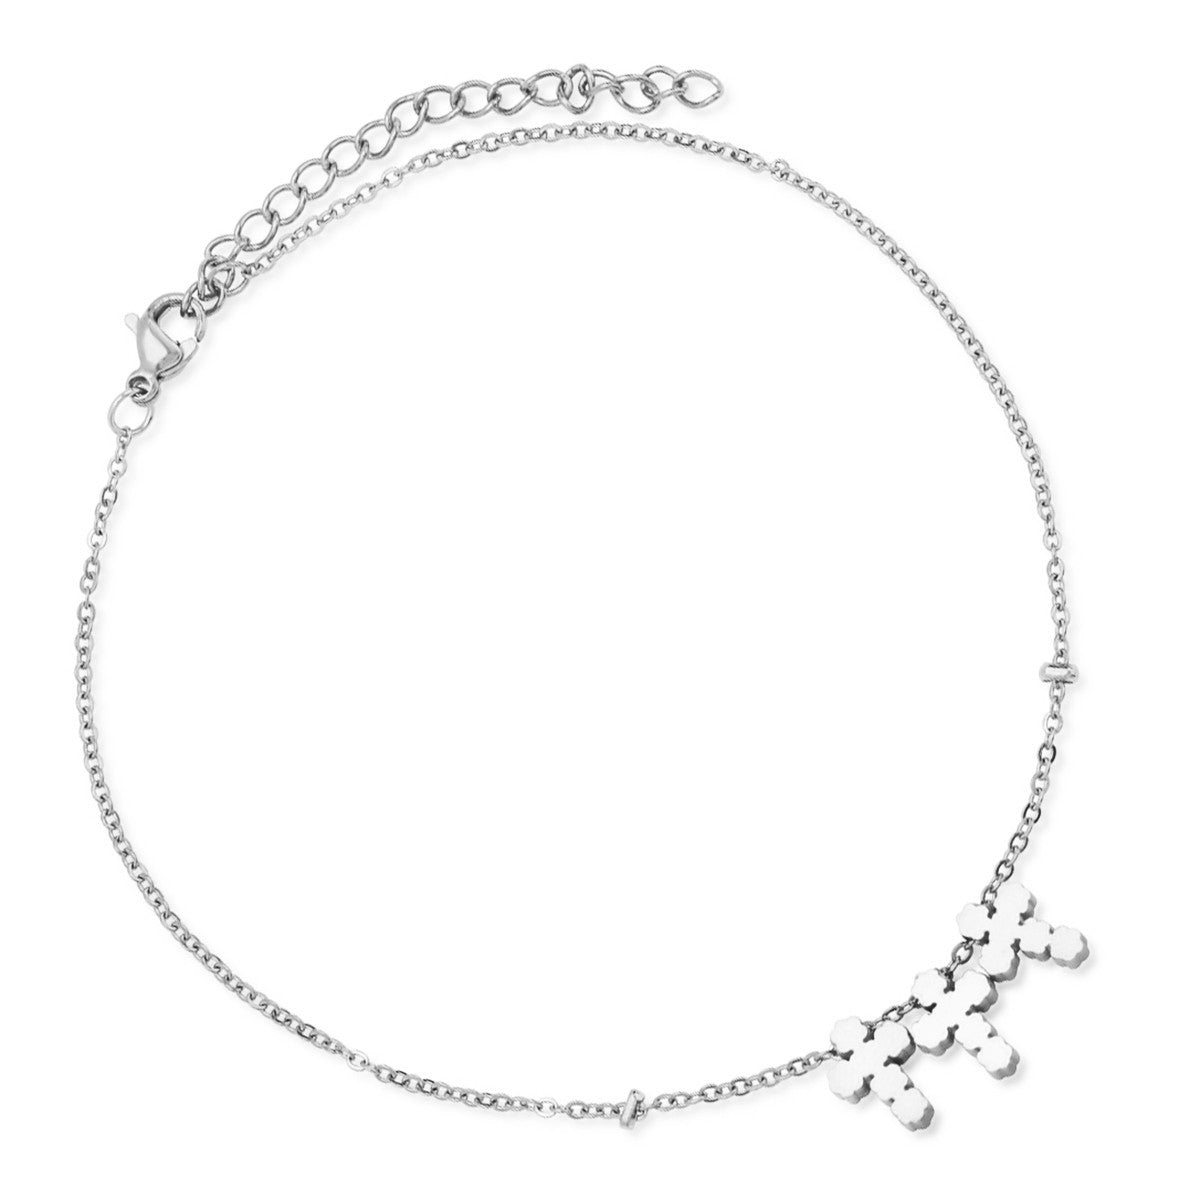 title:SteelTime Women's Stainless Steel Cross Charm Anklet;color:Silver